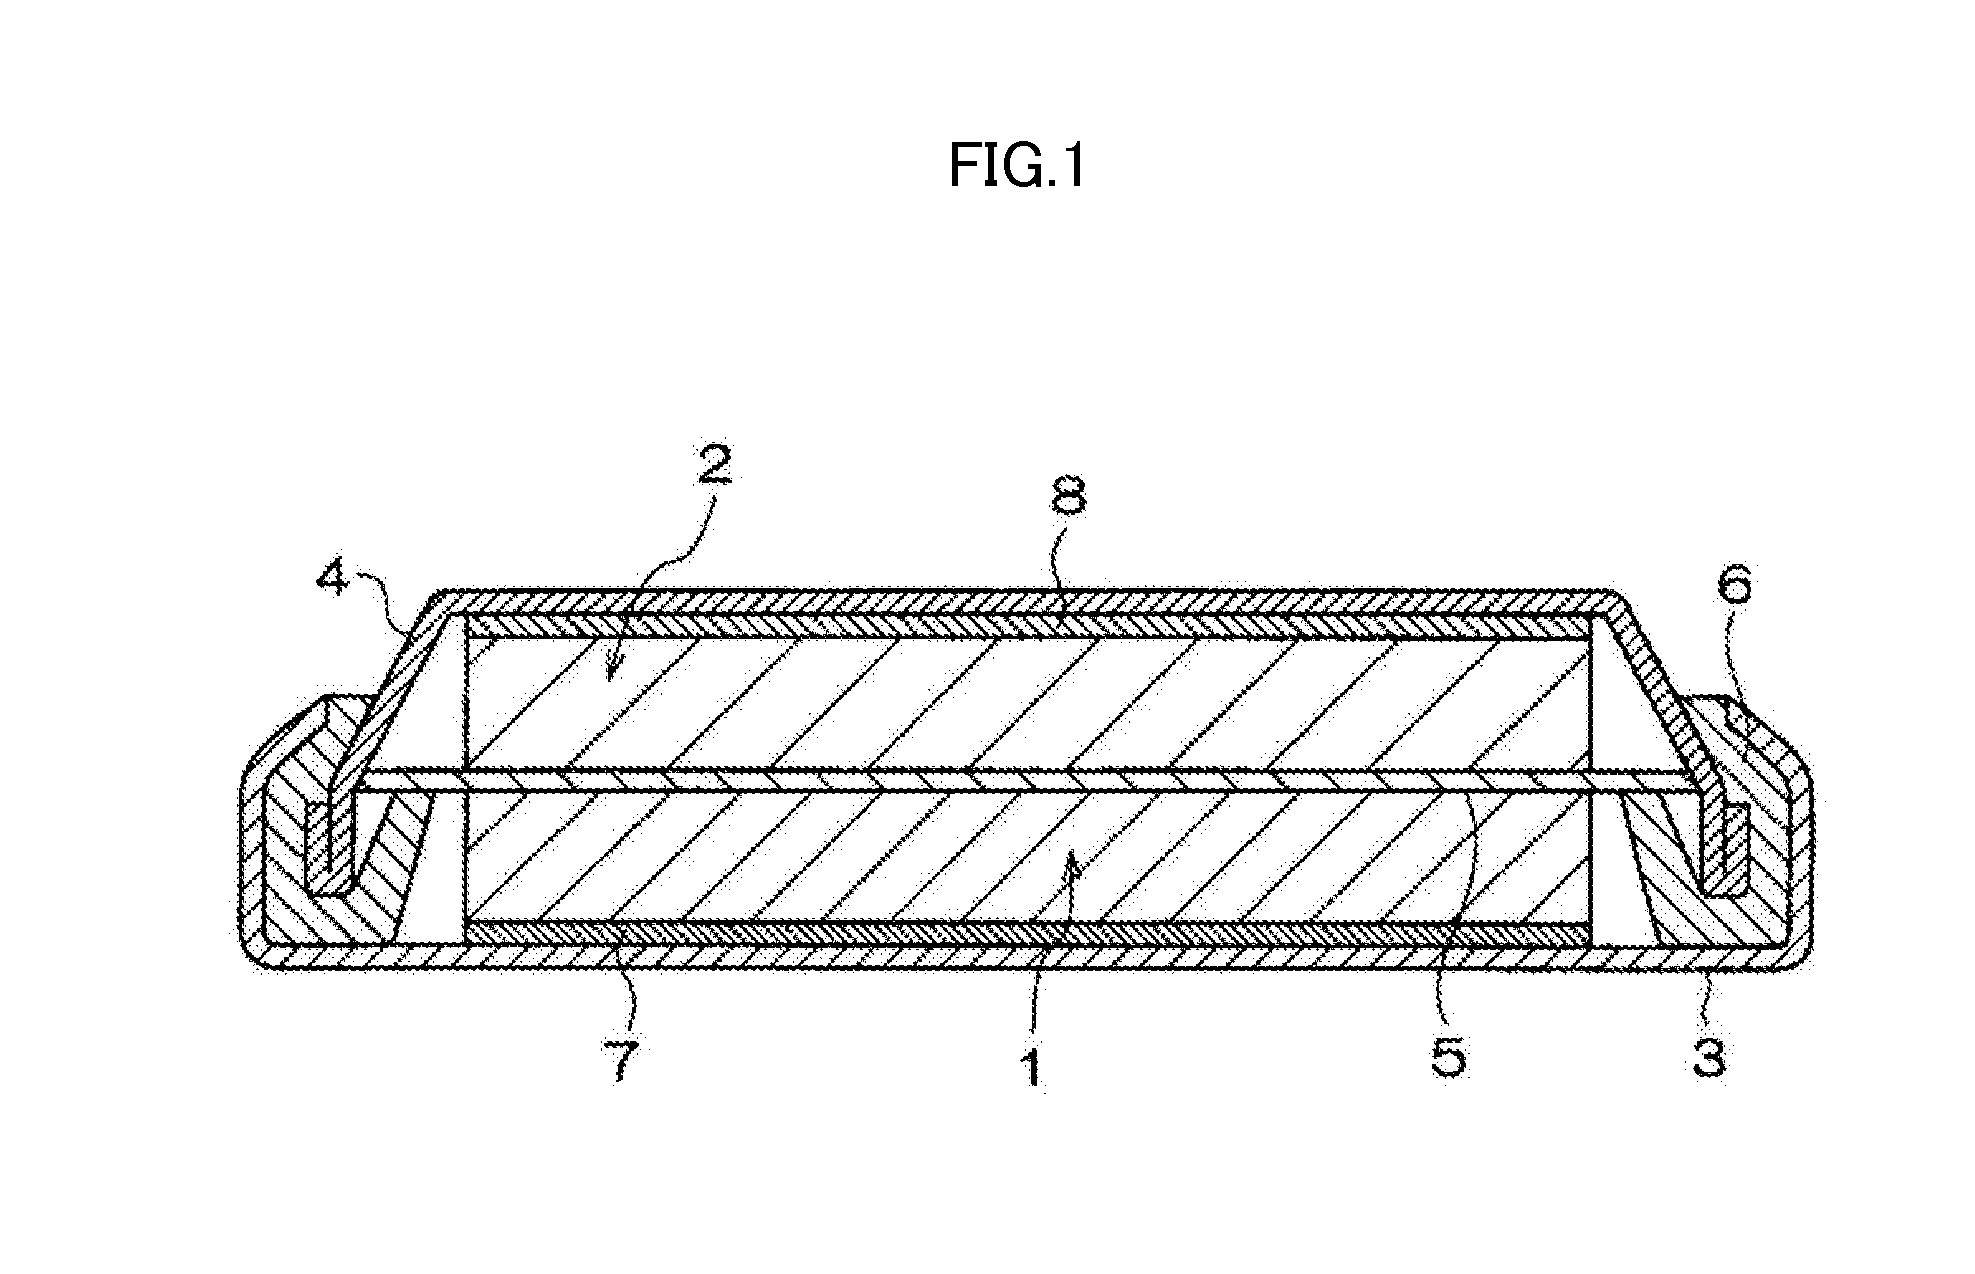 Cyclic sulfate compound, non-aqueous electrolyte solution containing same, and lithium secondary battery